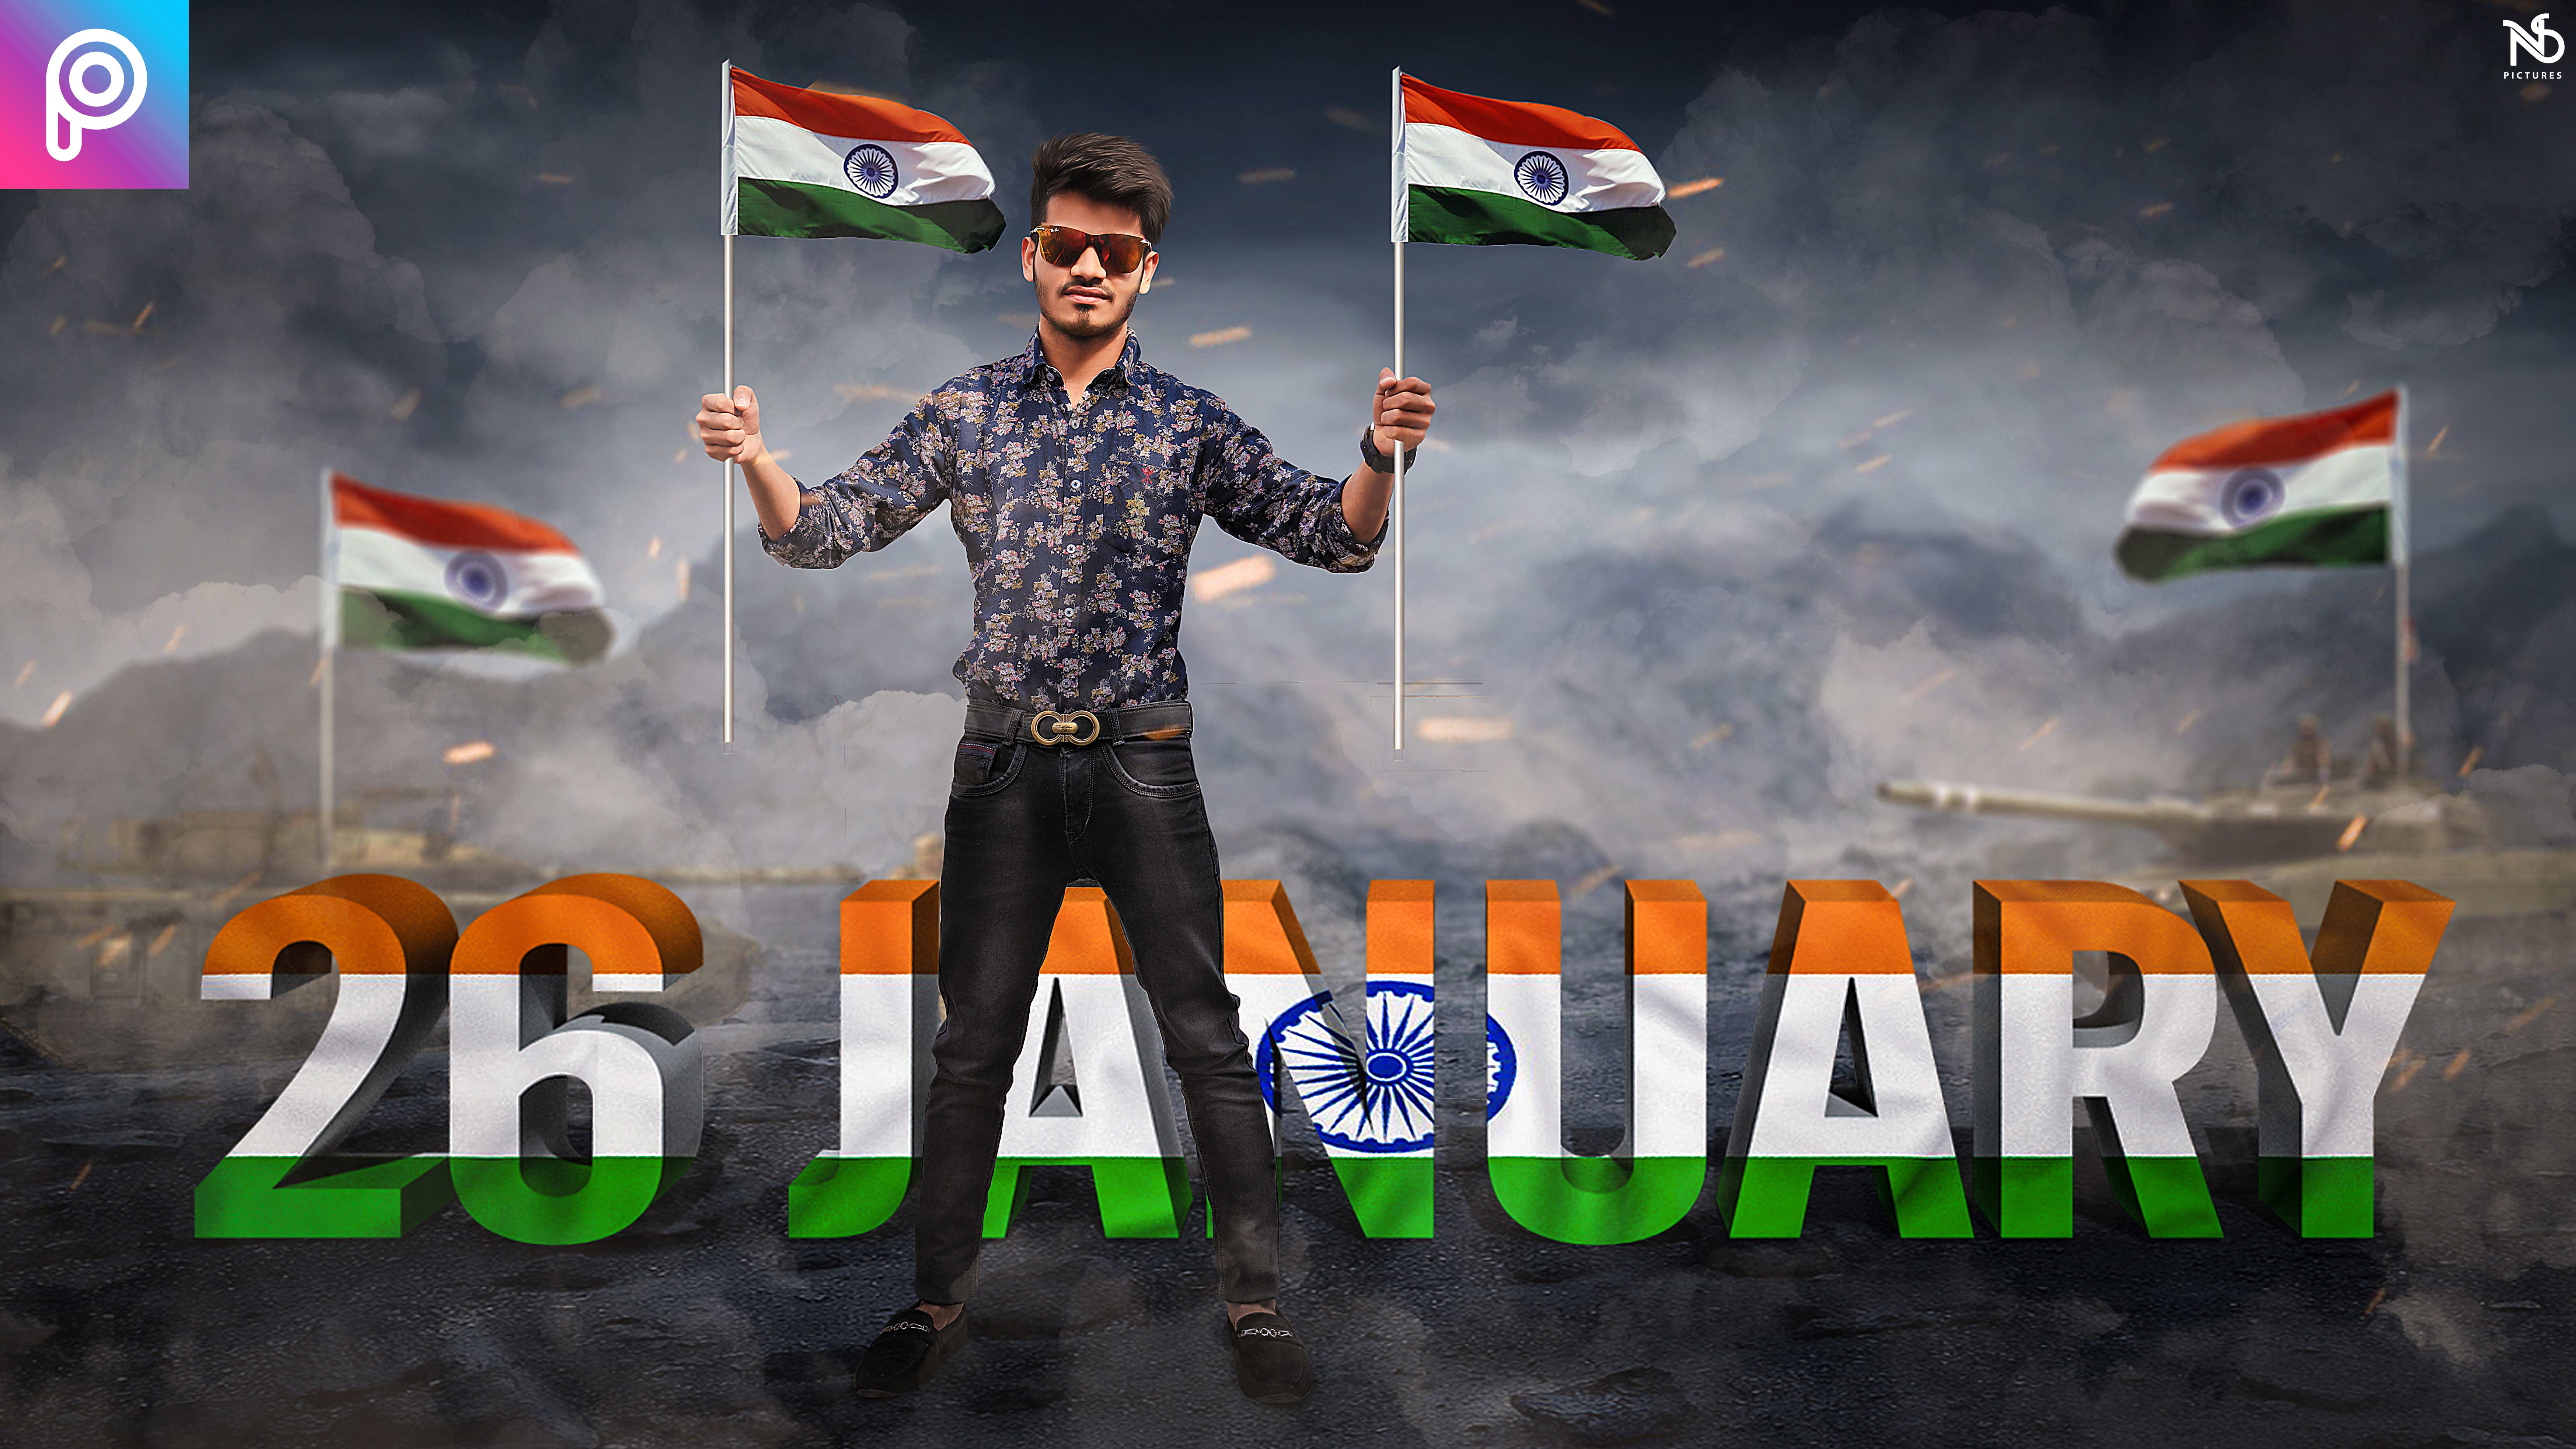 Republic Day Editing Backgrounds Archives Nsb Pictures Hi guys i am going to giving you the top republic day hd editing backgrounds which is mainly use for professional photo editing. republic day editing backgrounds archives nsb pictures